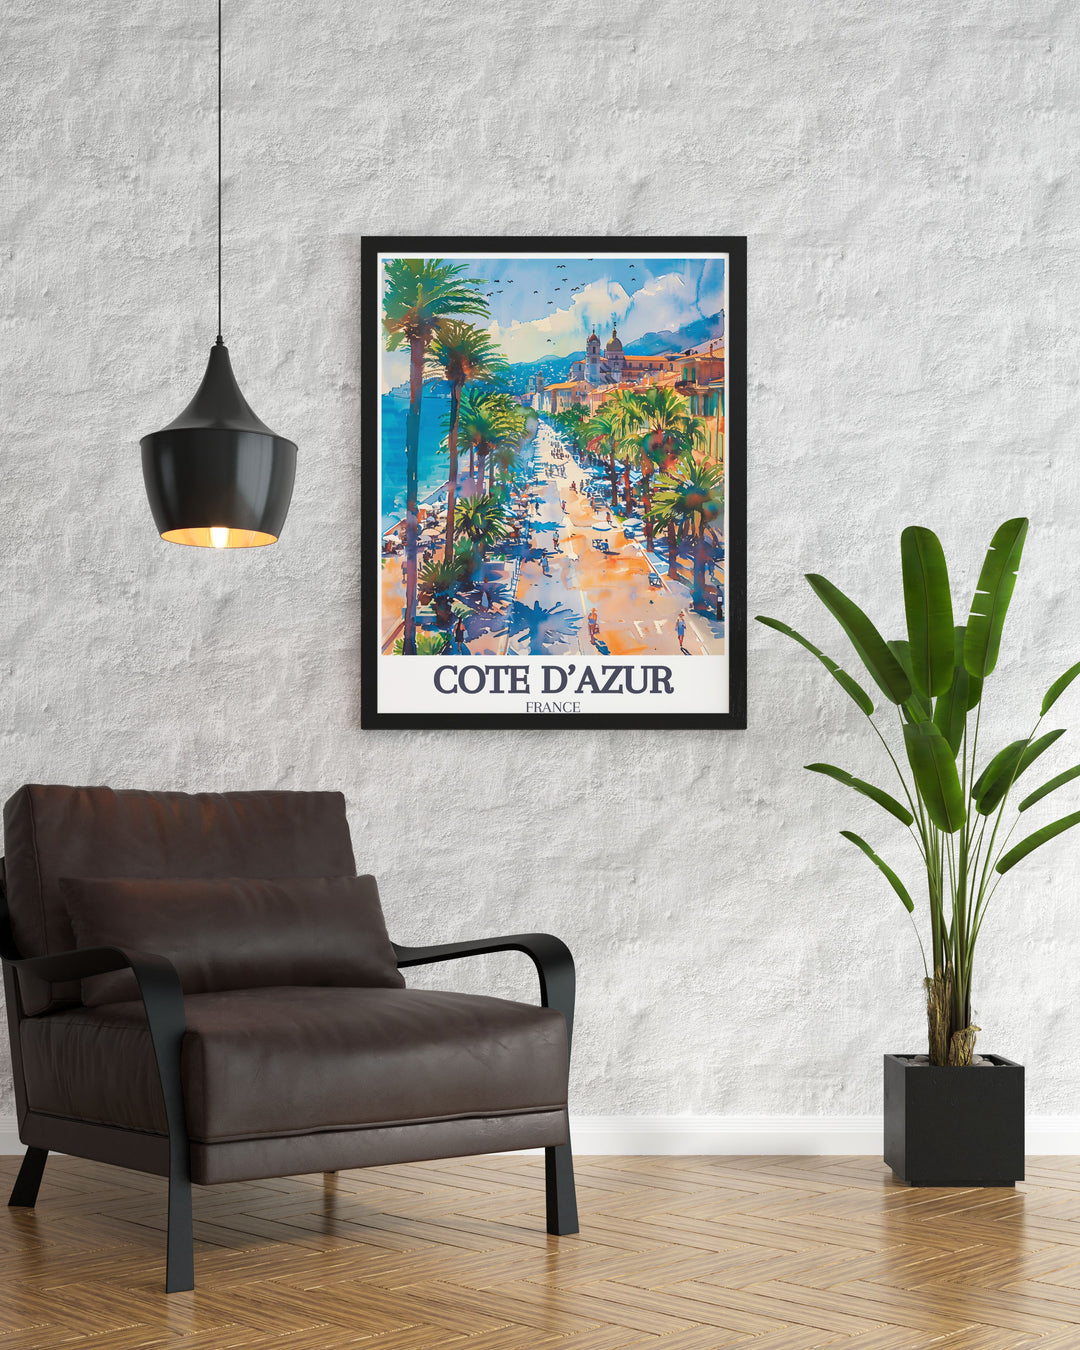 This travel print of the Promenade des Anglais highlights the beauty of the Côte dAzurs coastline, perfect for adding a touch of sophistication and natural beauty to your home decor.